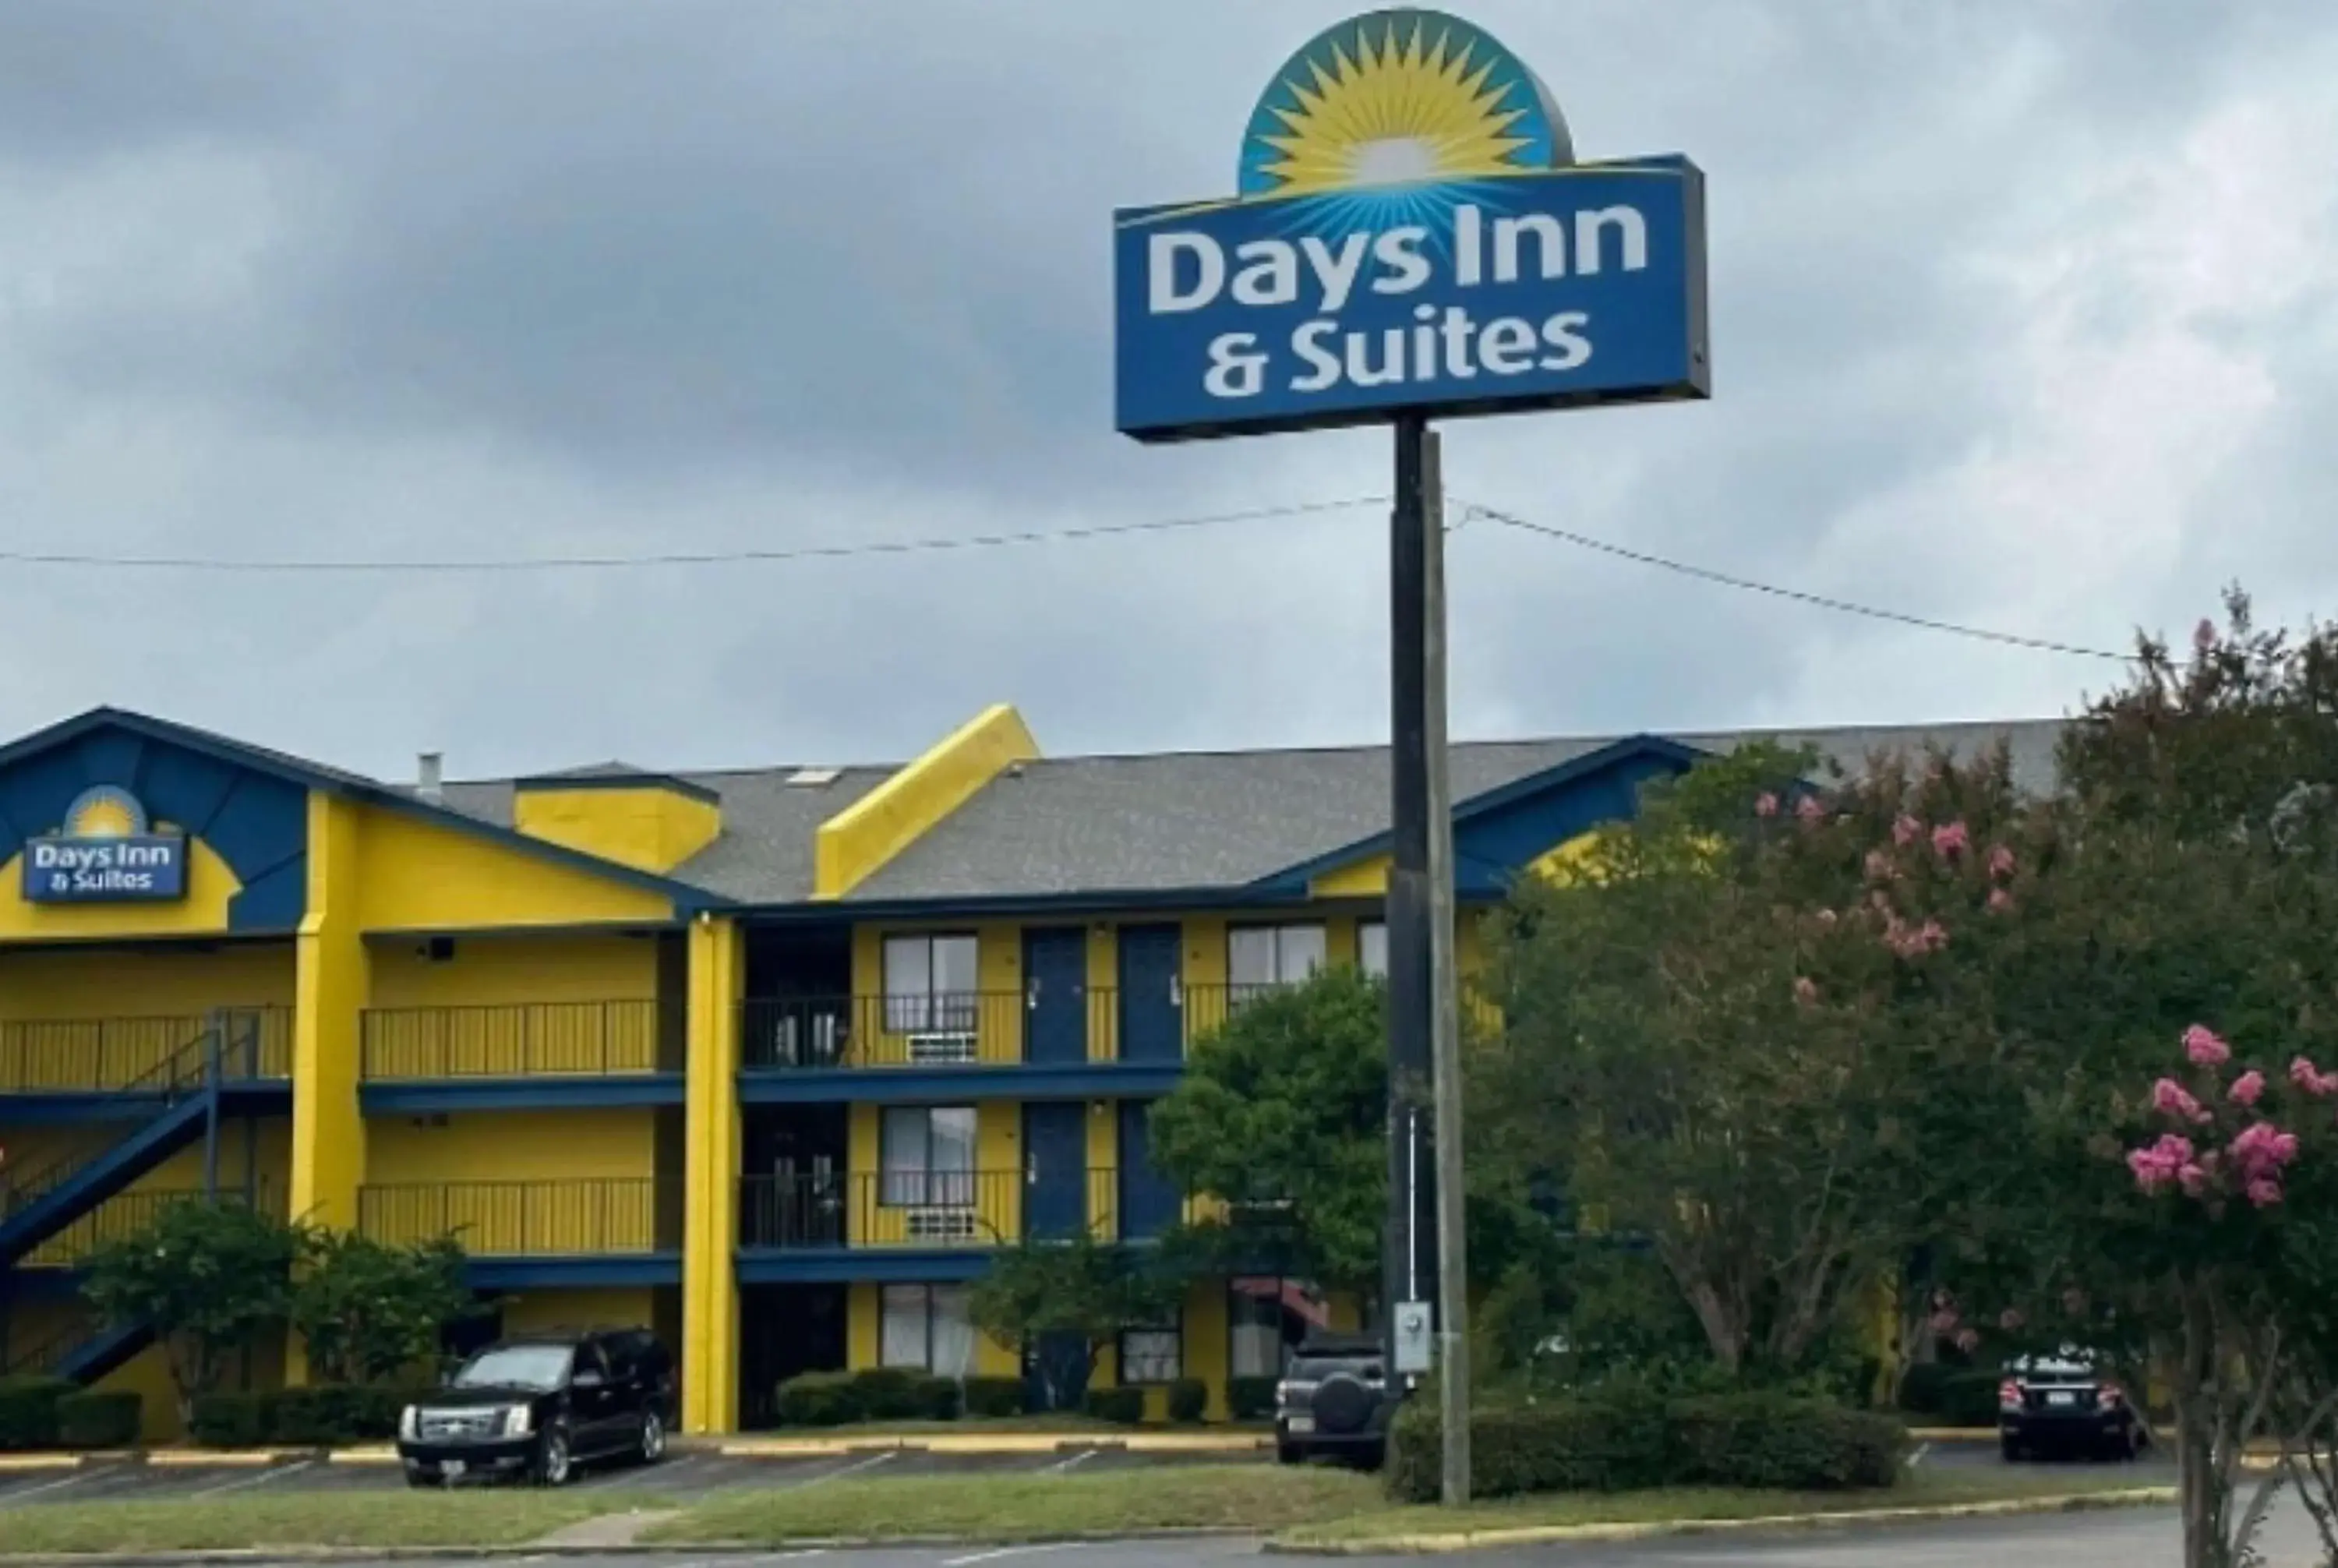 Property Building in Days Inn & Suites Mobile